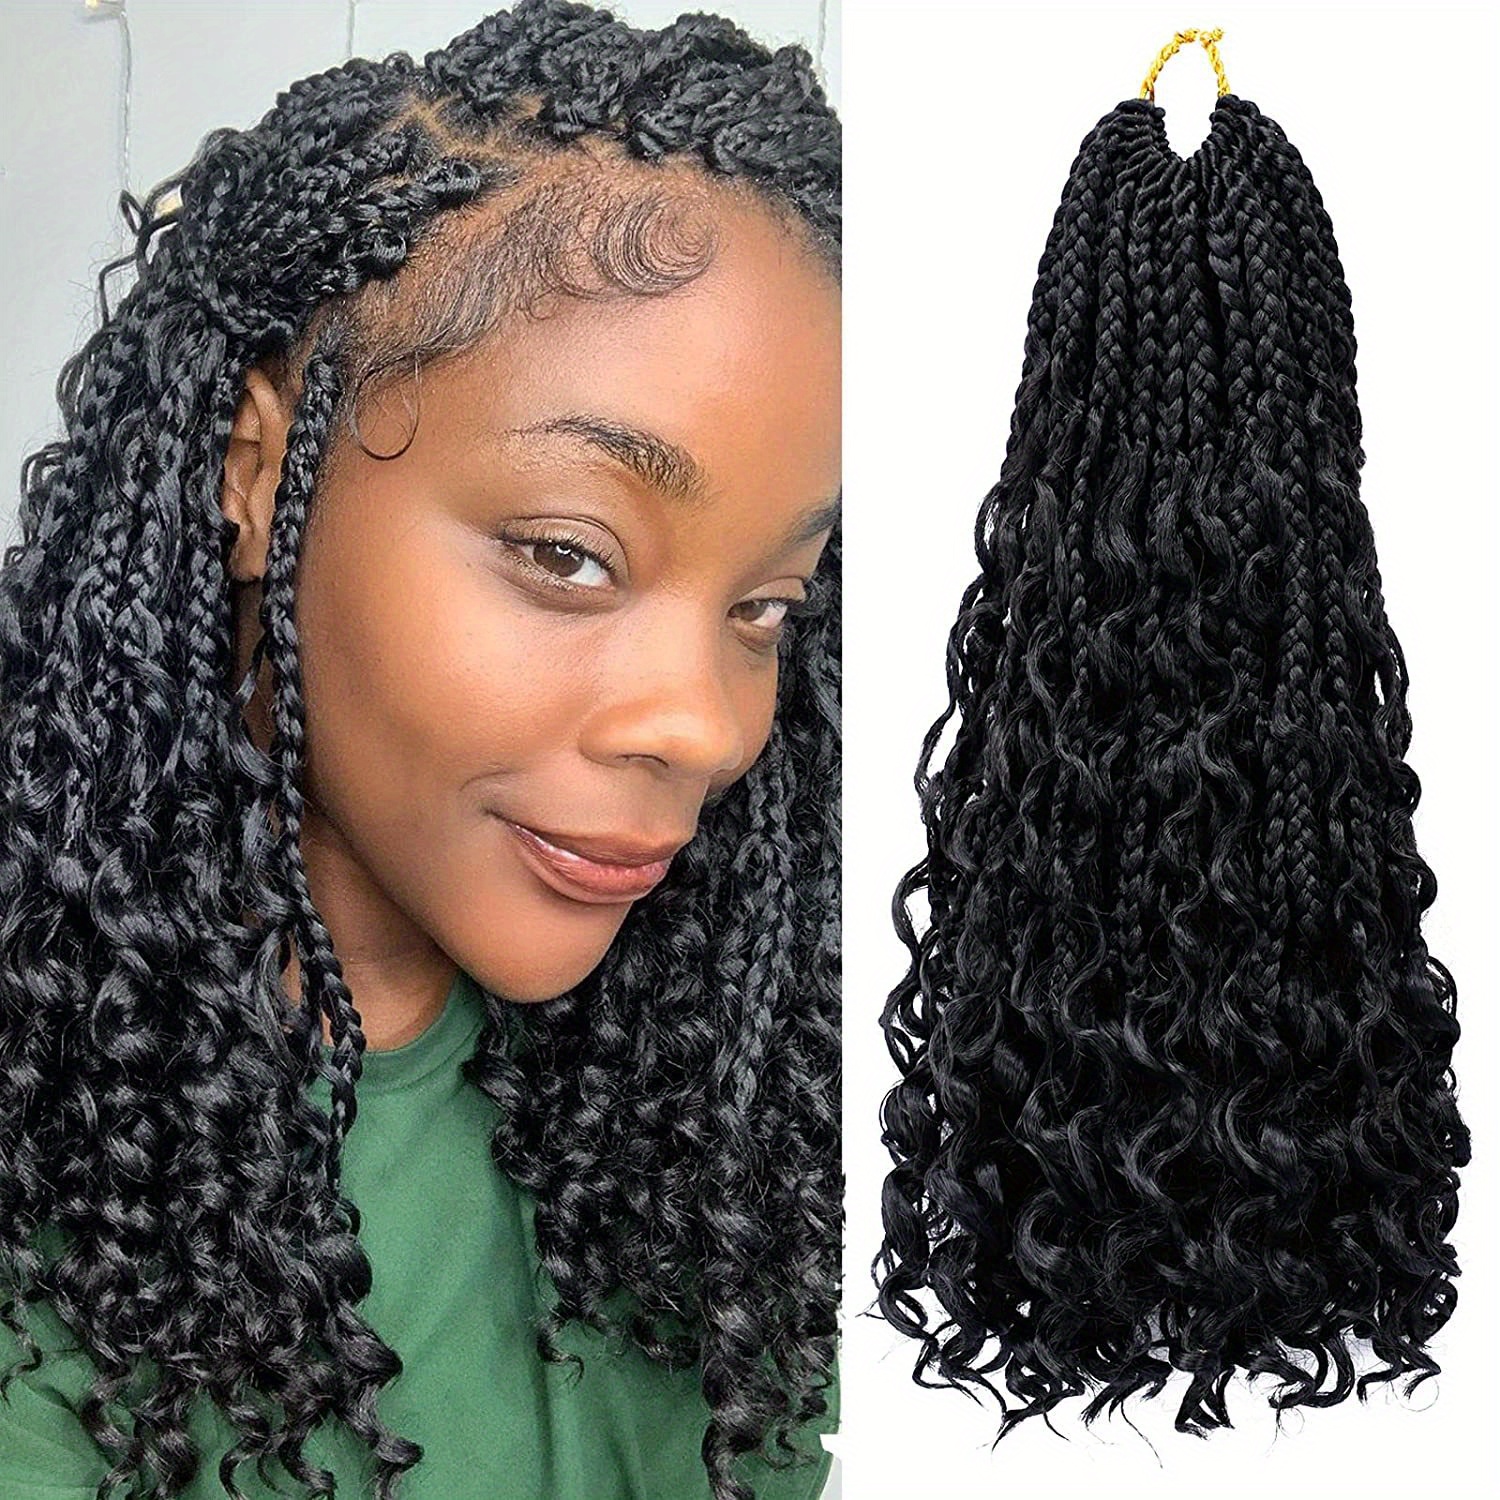 8 Packs 14 Inch Goddess Boho Box Braids Gypsy Bohemian Braids With Wavy  Curly Ends Pre-looped Synthetic Crochet Hair For Black Women1b